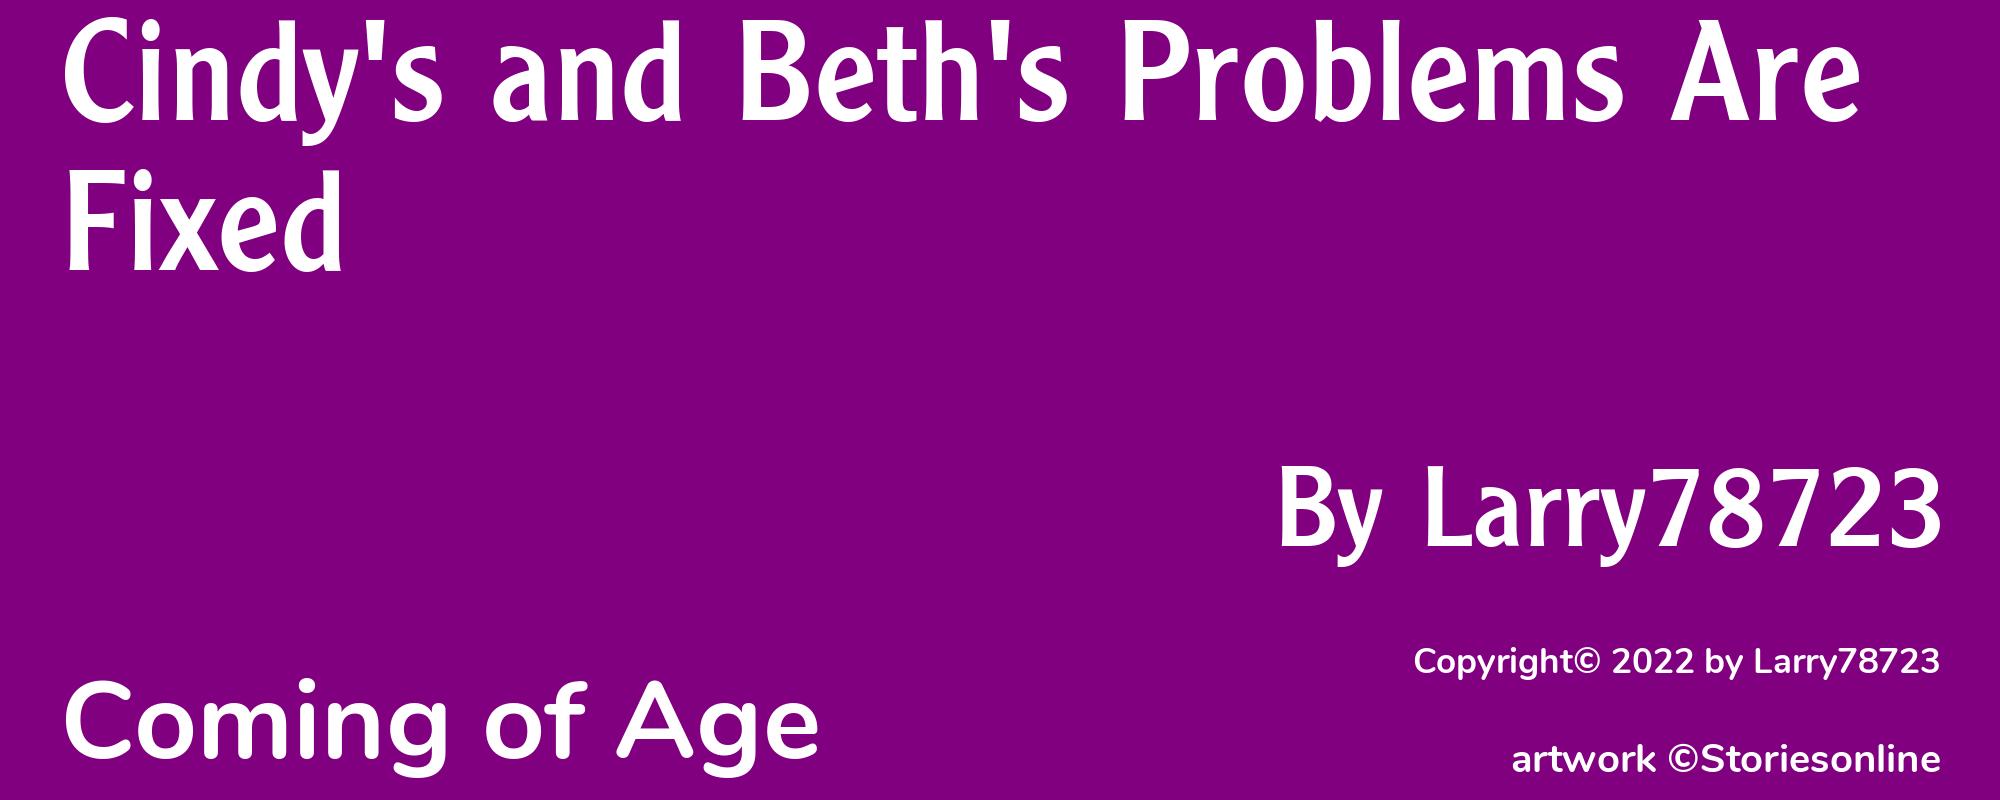 Cindy's and Beth's Problems Are Fixed - Cover